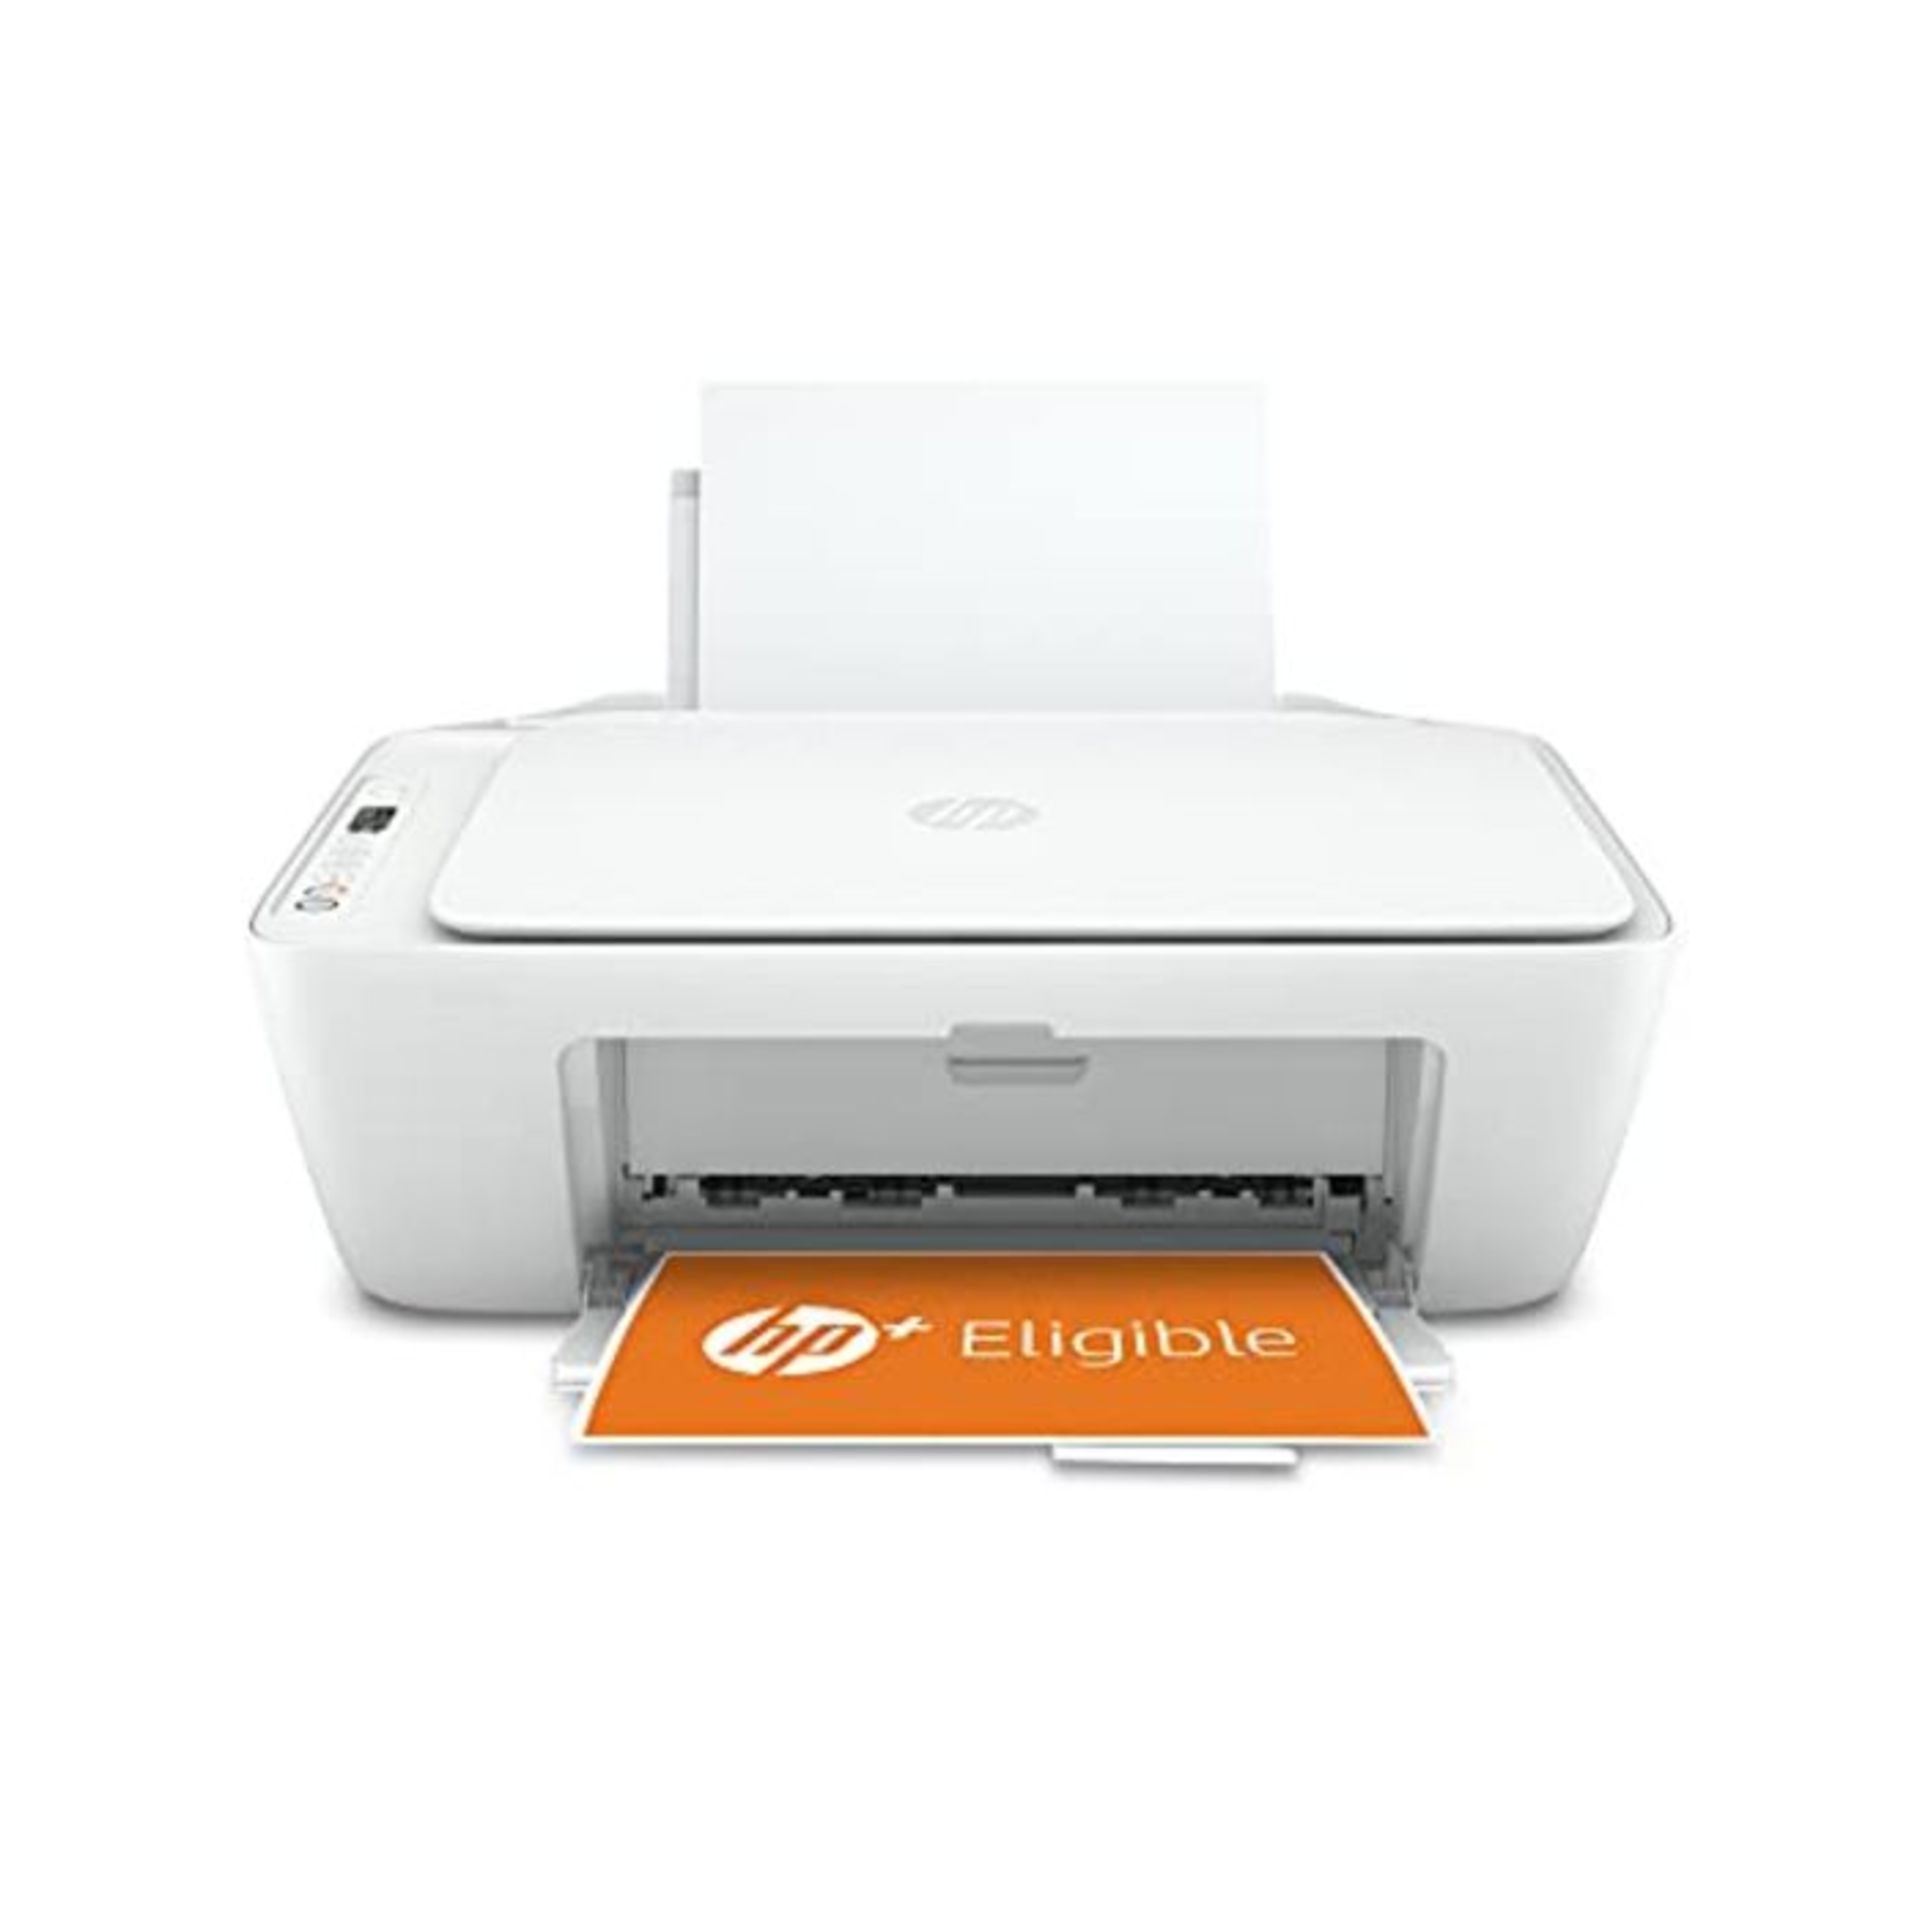 HP DeskJet 2710e All-In-One Colour Printer with 6 Months of Instant Ink with HP+ - Image 4 of 6